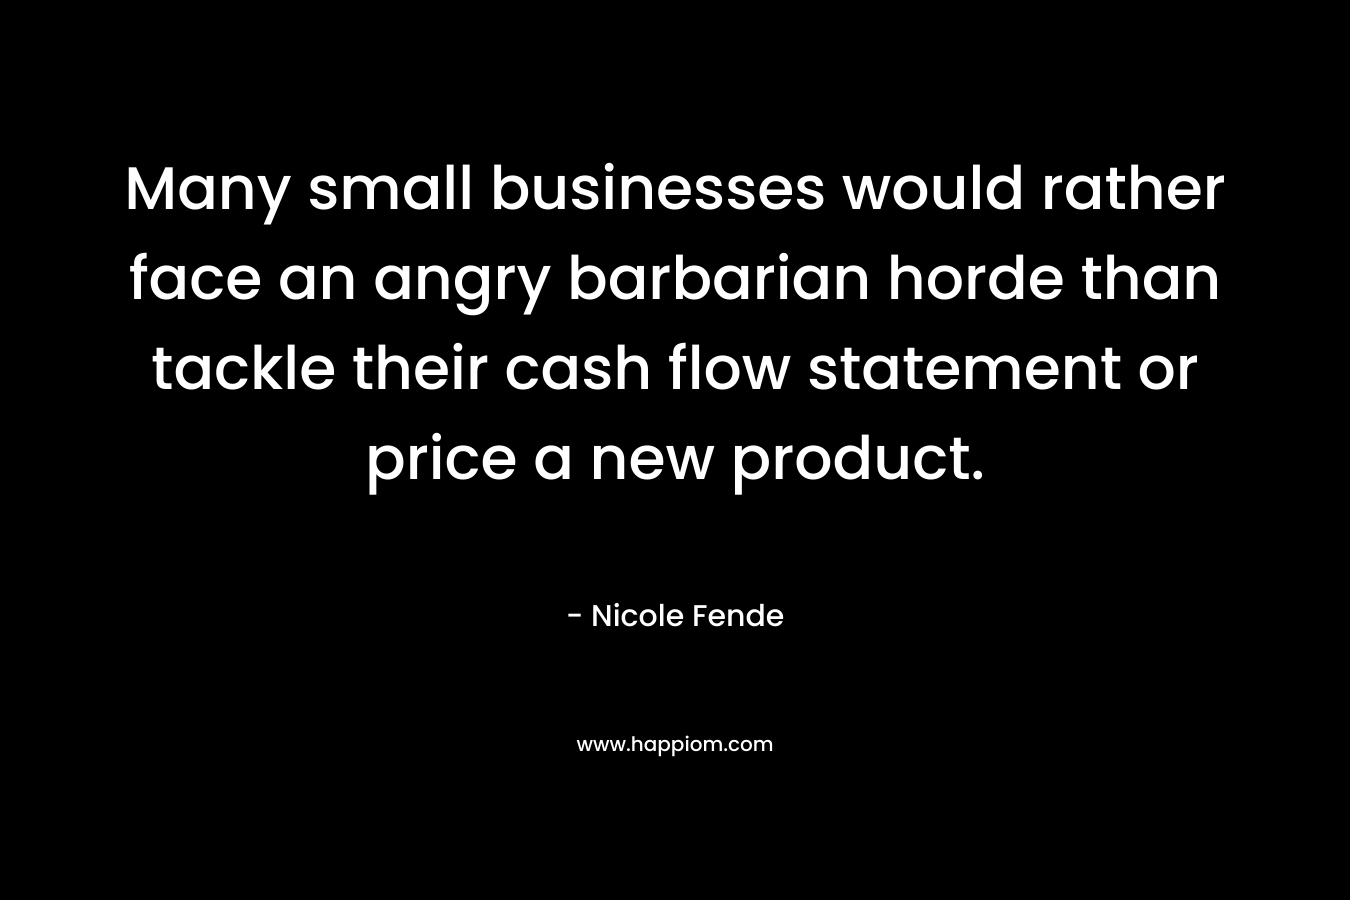 Many small businesses would rather face an angry barbarian horde than tackle their cash flow statement or price a new product. – Nicole Fende